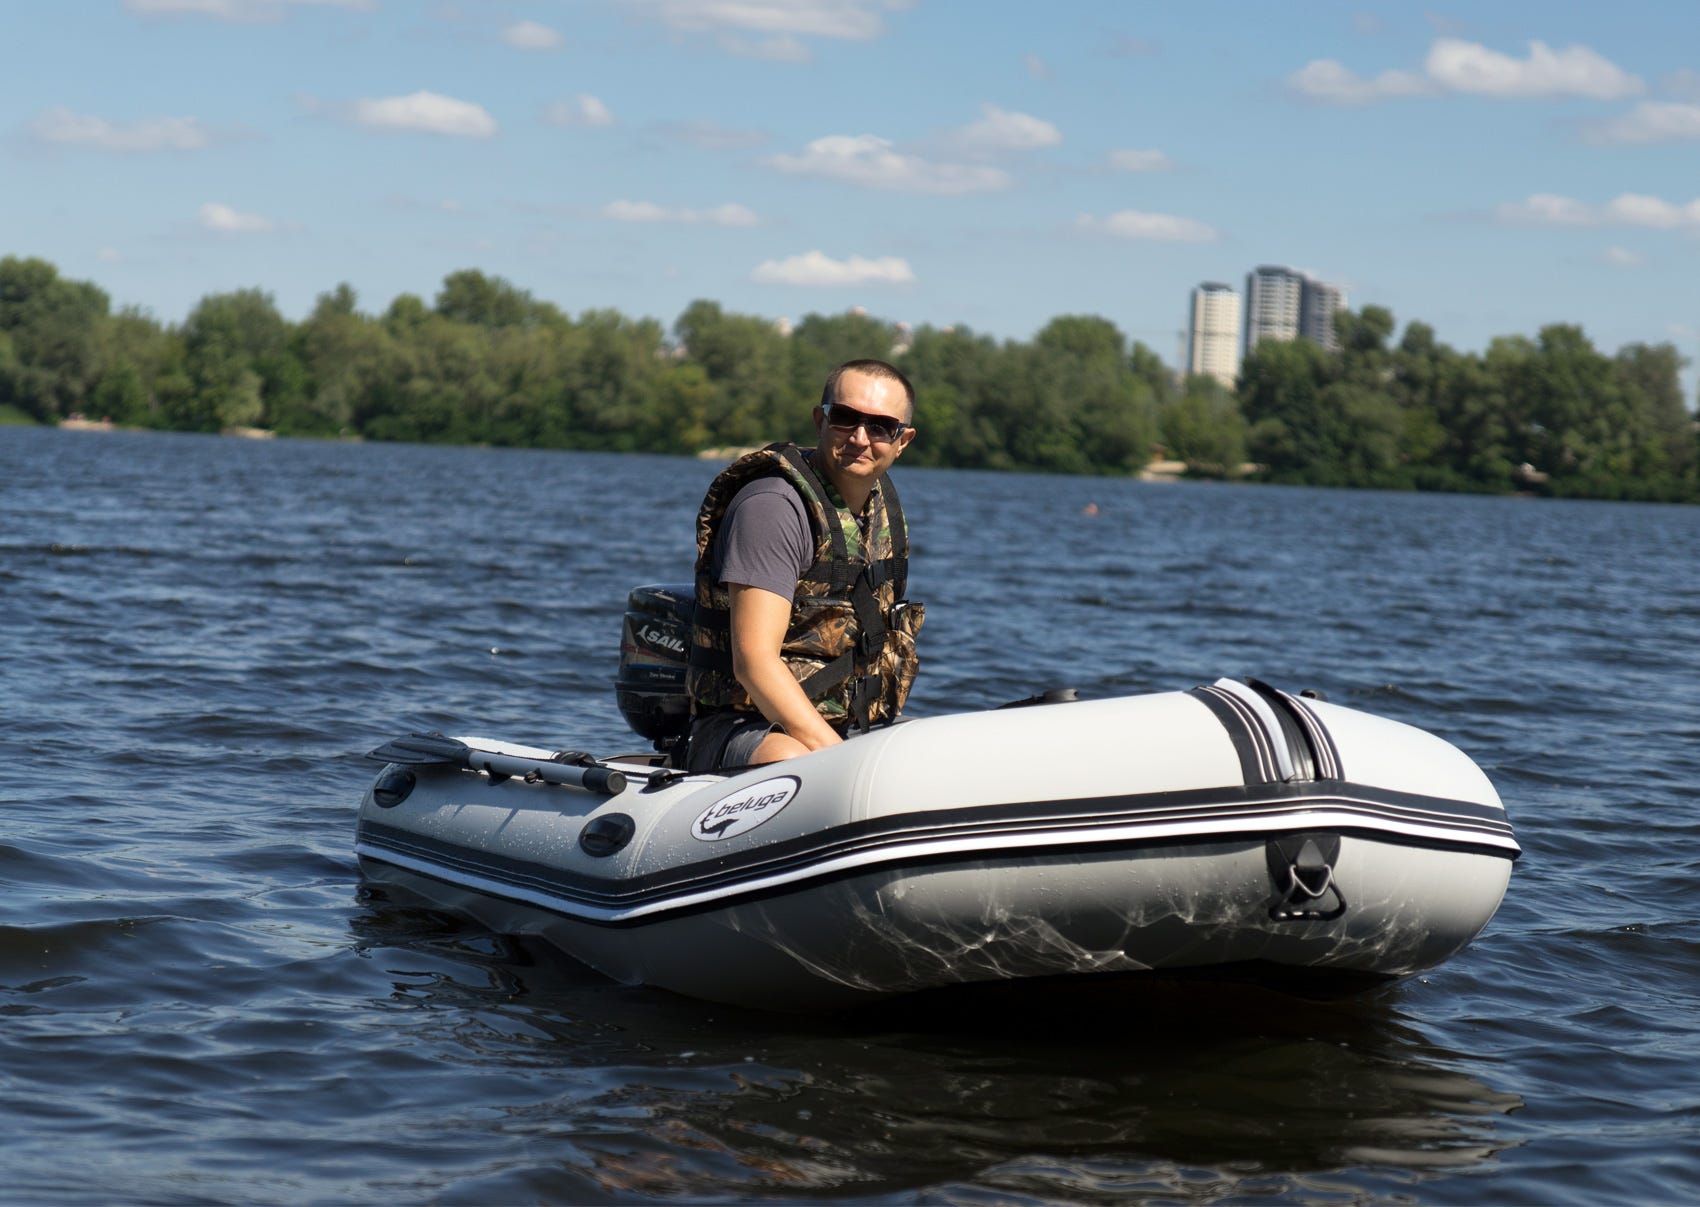 Pros and Cons of Rigid Inflatable Boat, by Beluga Boats